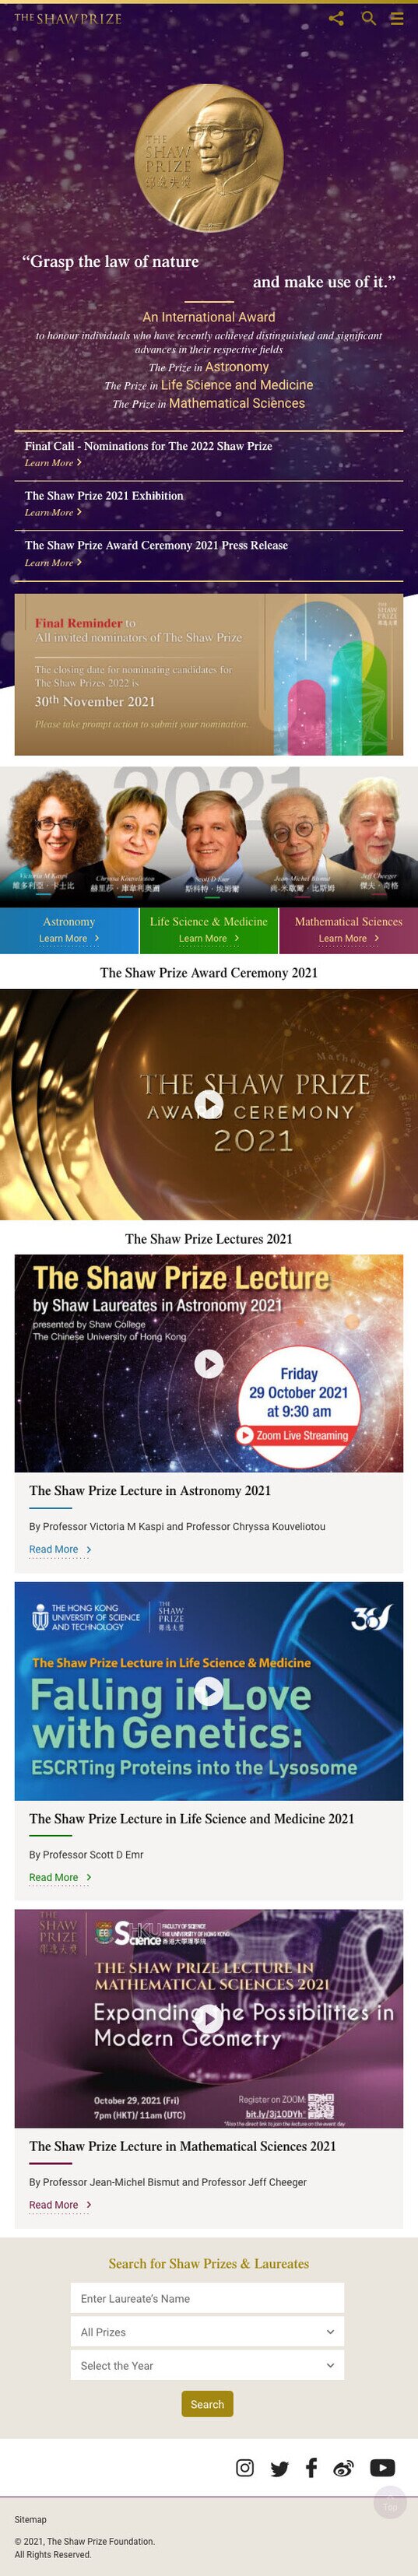 The Shaw Prize Tablet Homepage